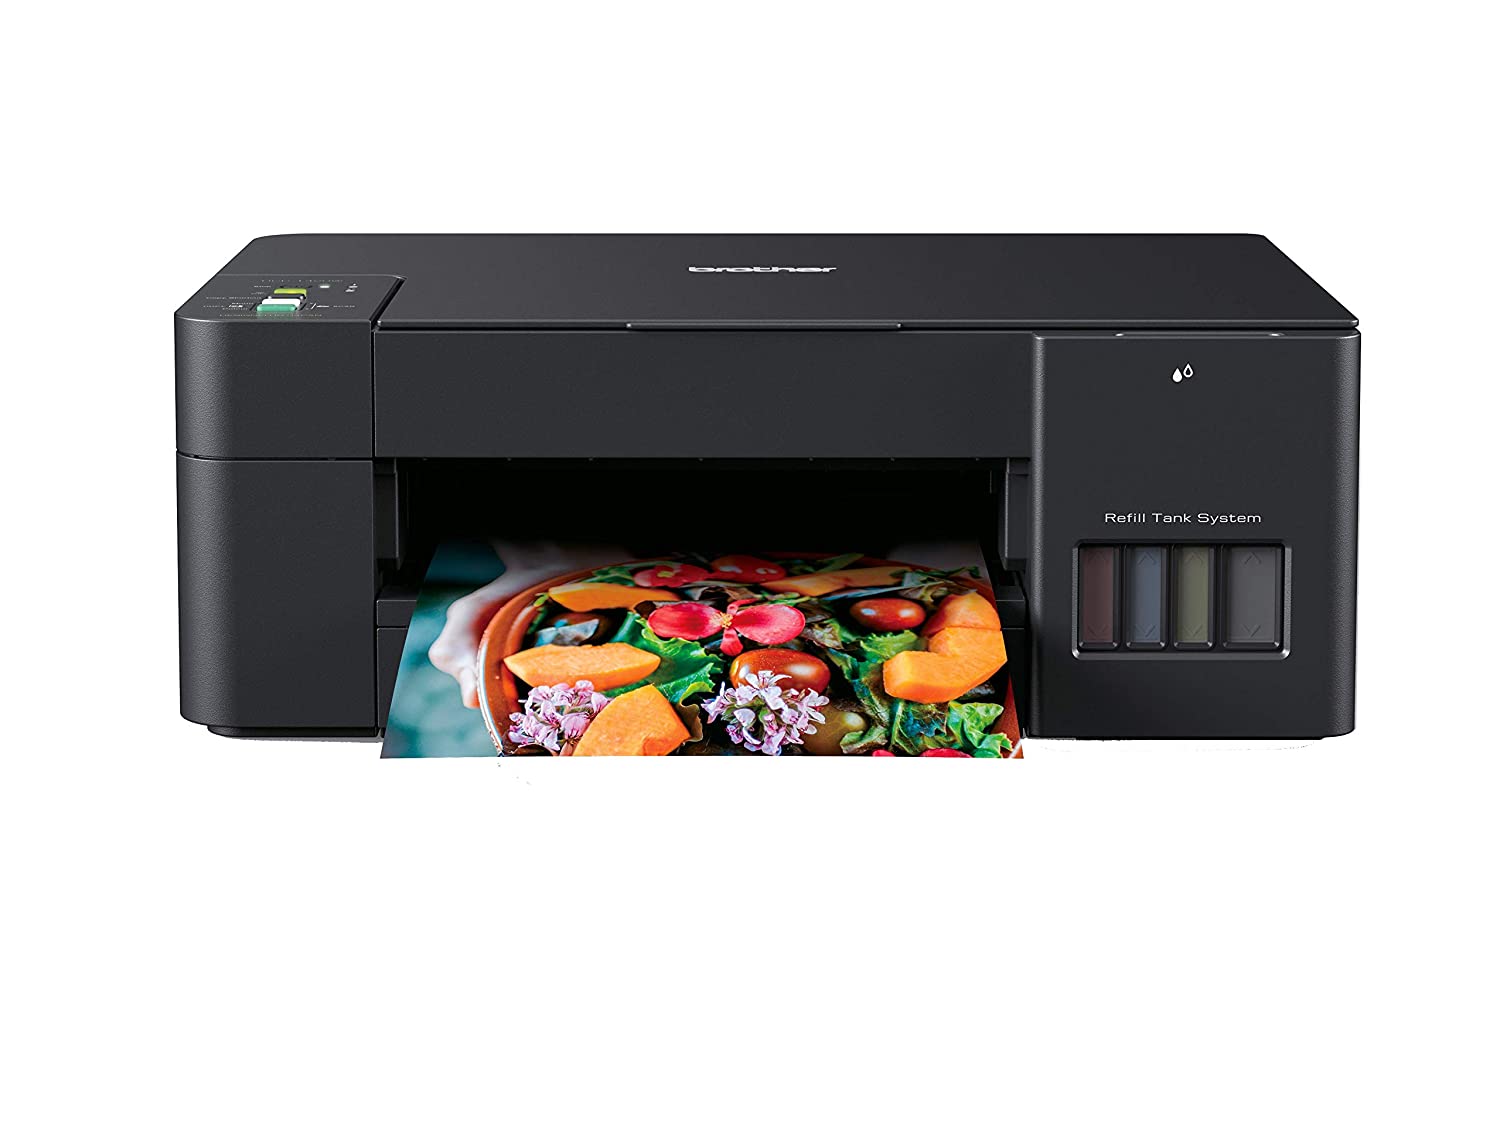 How to Install Brother Printer DCP-T420W